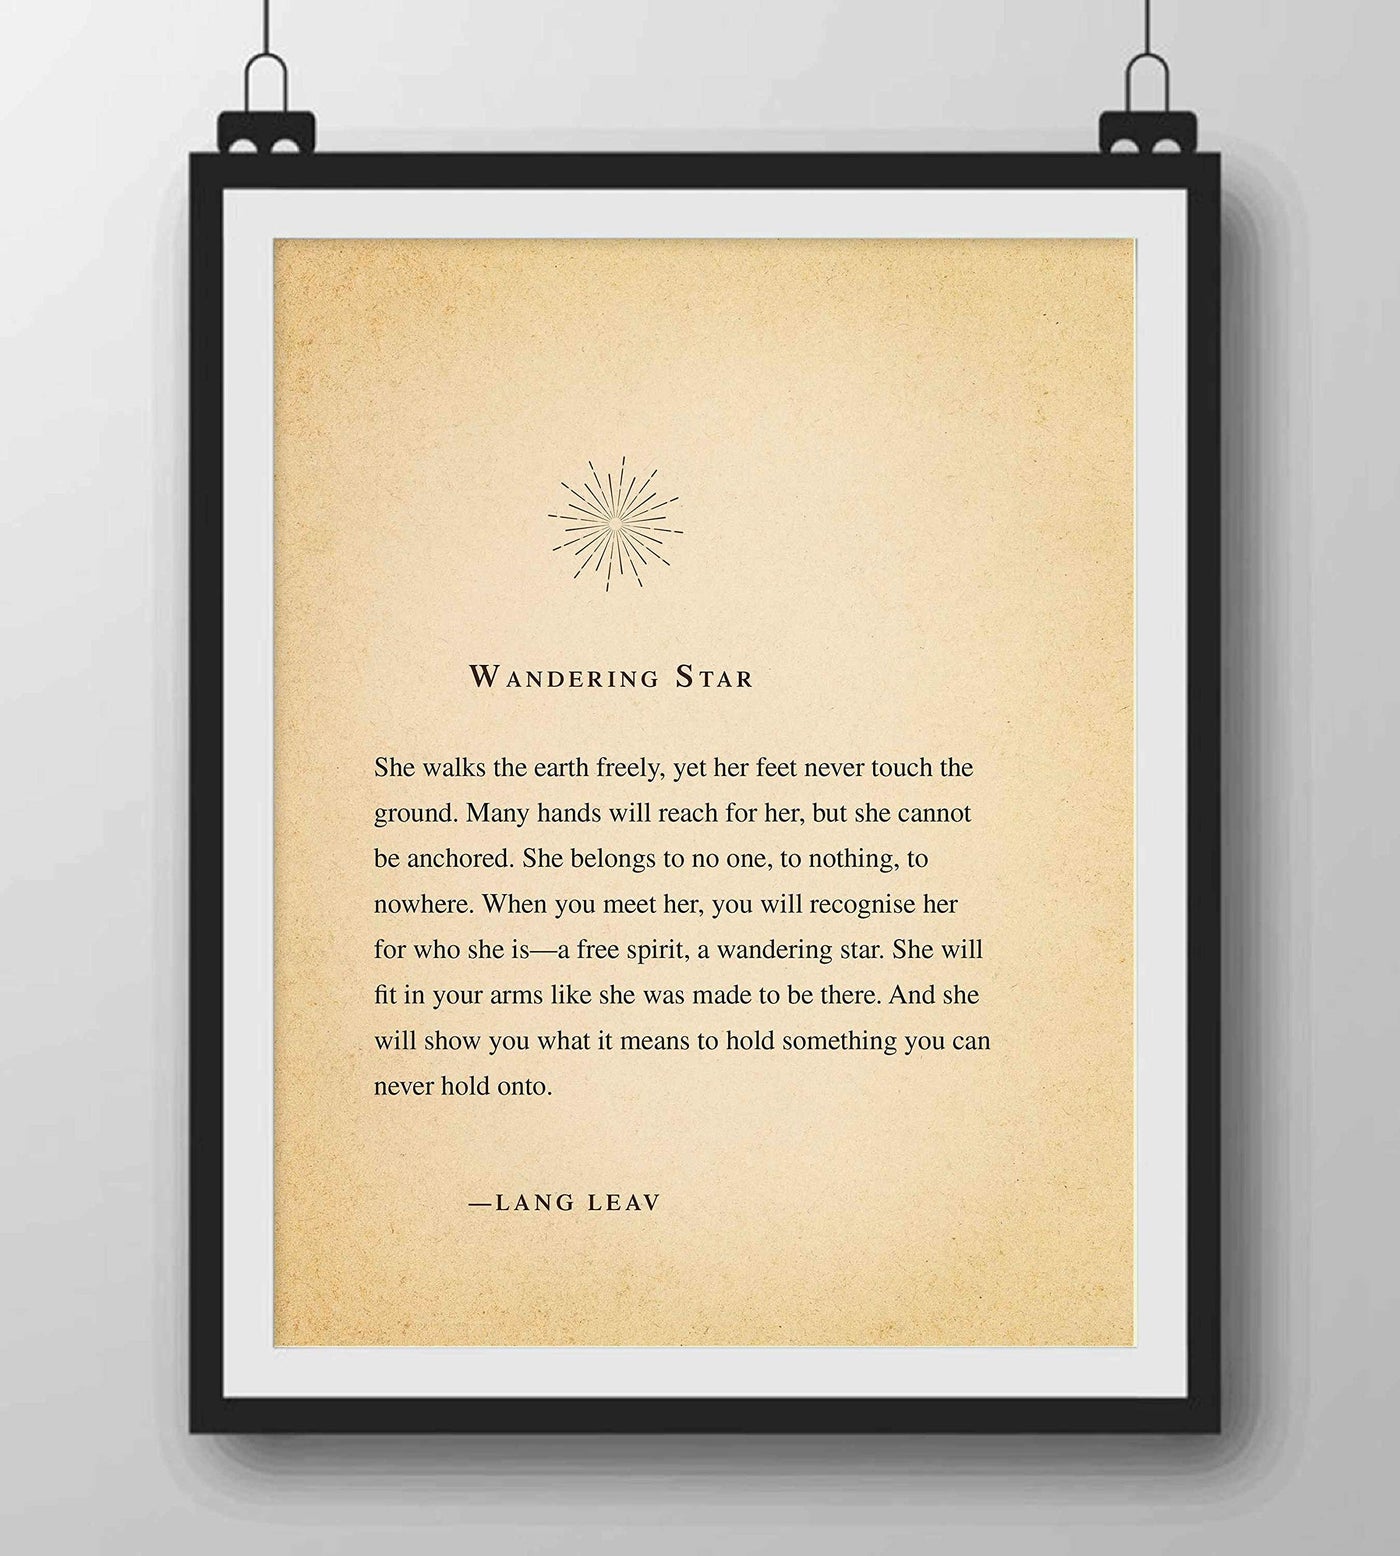 Lang Leav-"Wandering Star"-Love Quotes Wall Decor-8 x 10" Inspirational Wall Print-Ready to Frame. Distressed Romantic Poetry Art for Home-Bedroom-Studio Decor. Perfect Engagement or Wedding Gift!